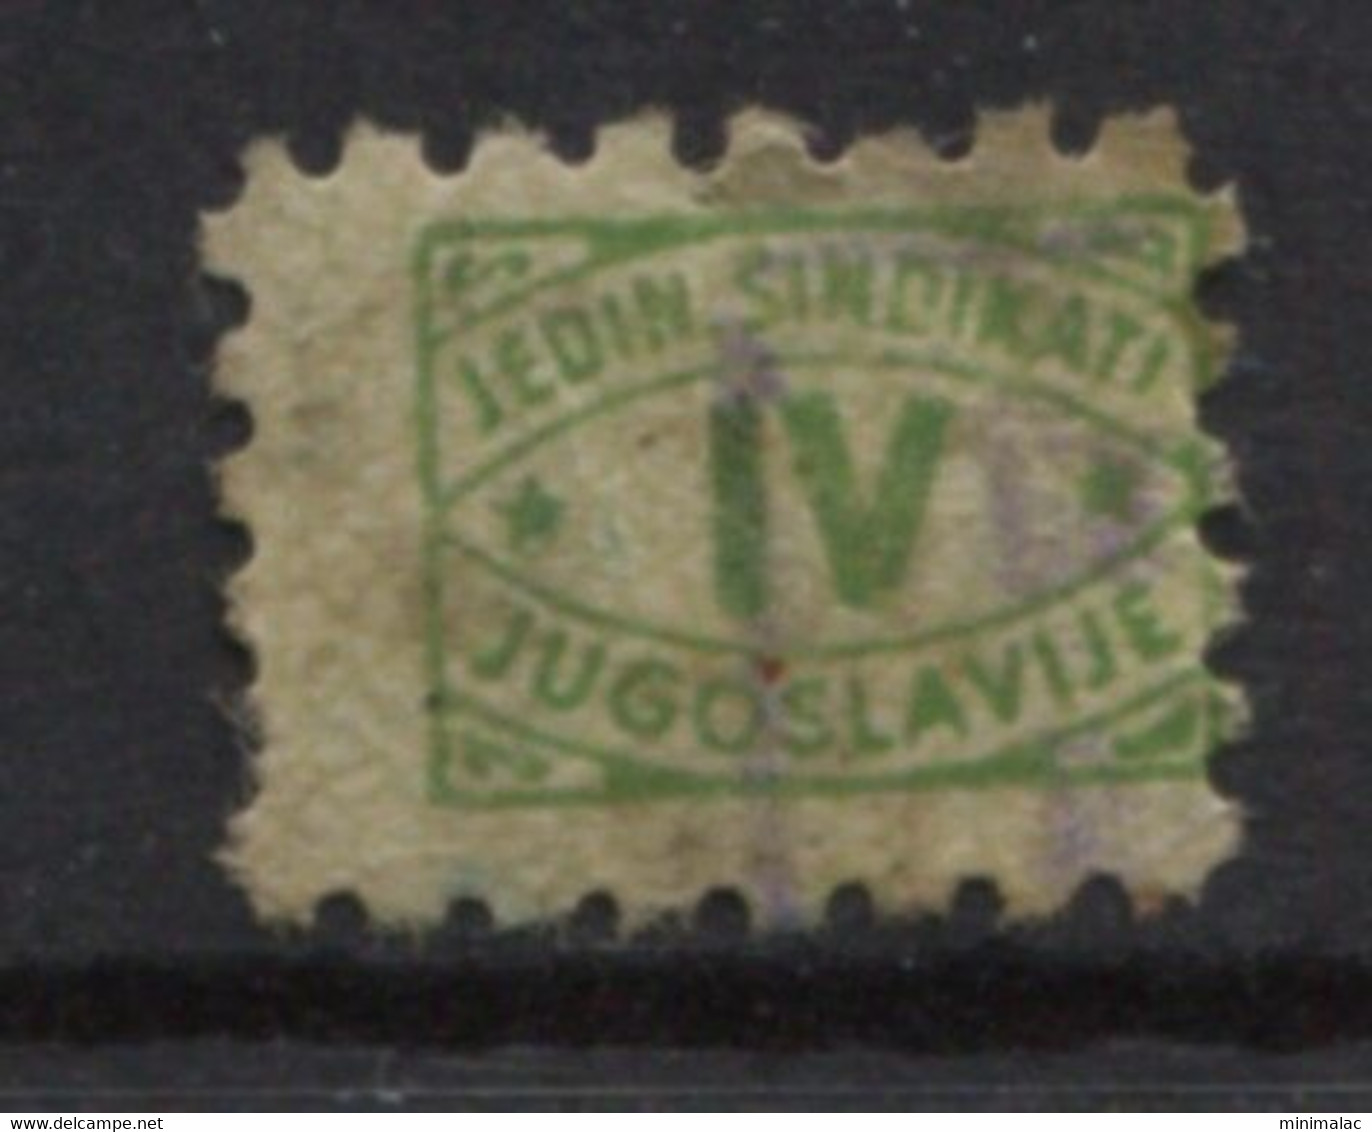 Yugoslavia 45-50's, Stamp For Membership, Labor Union, Administrative Stamp - Revenue, Tax Stamp, IV, Light Green - Officials